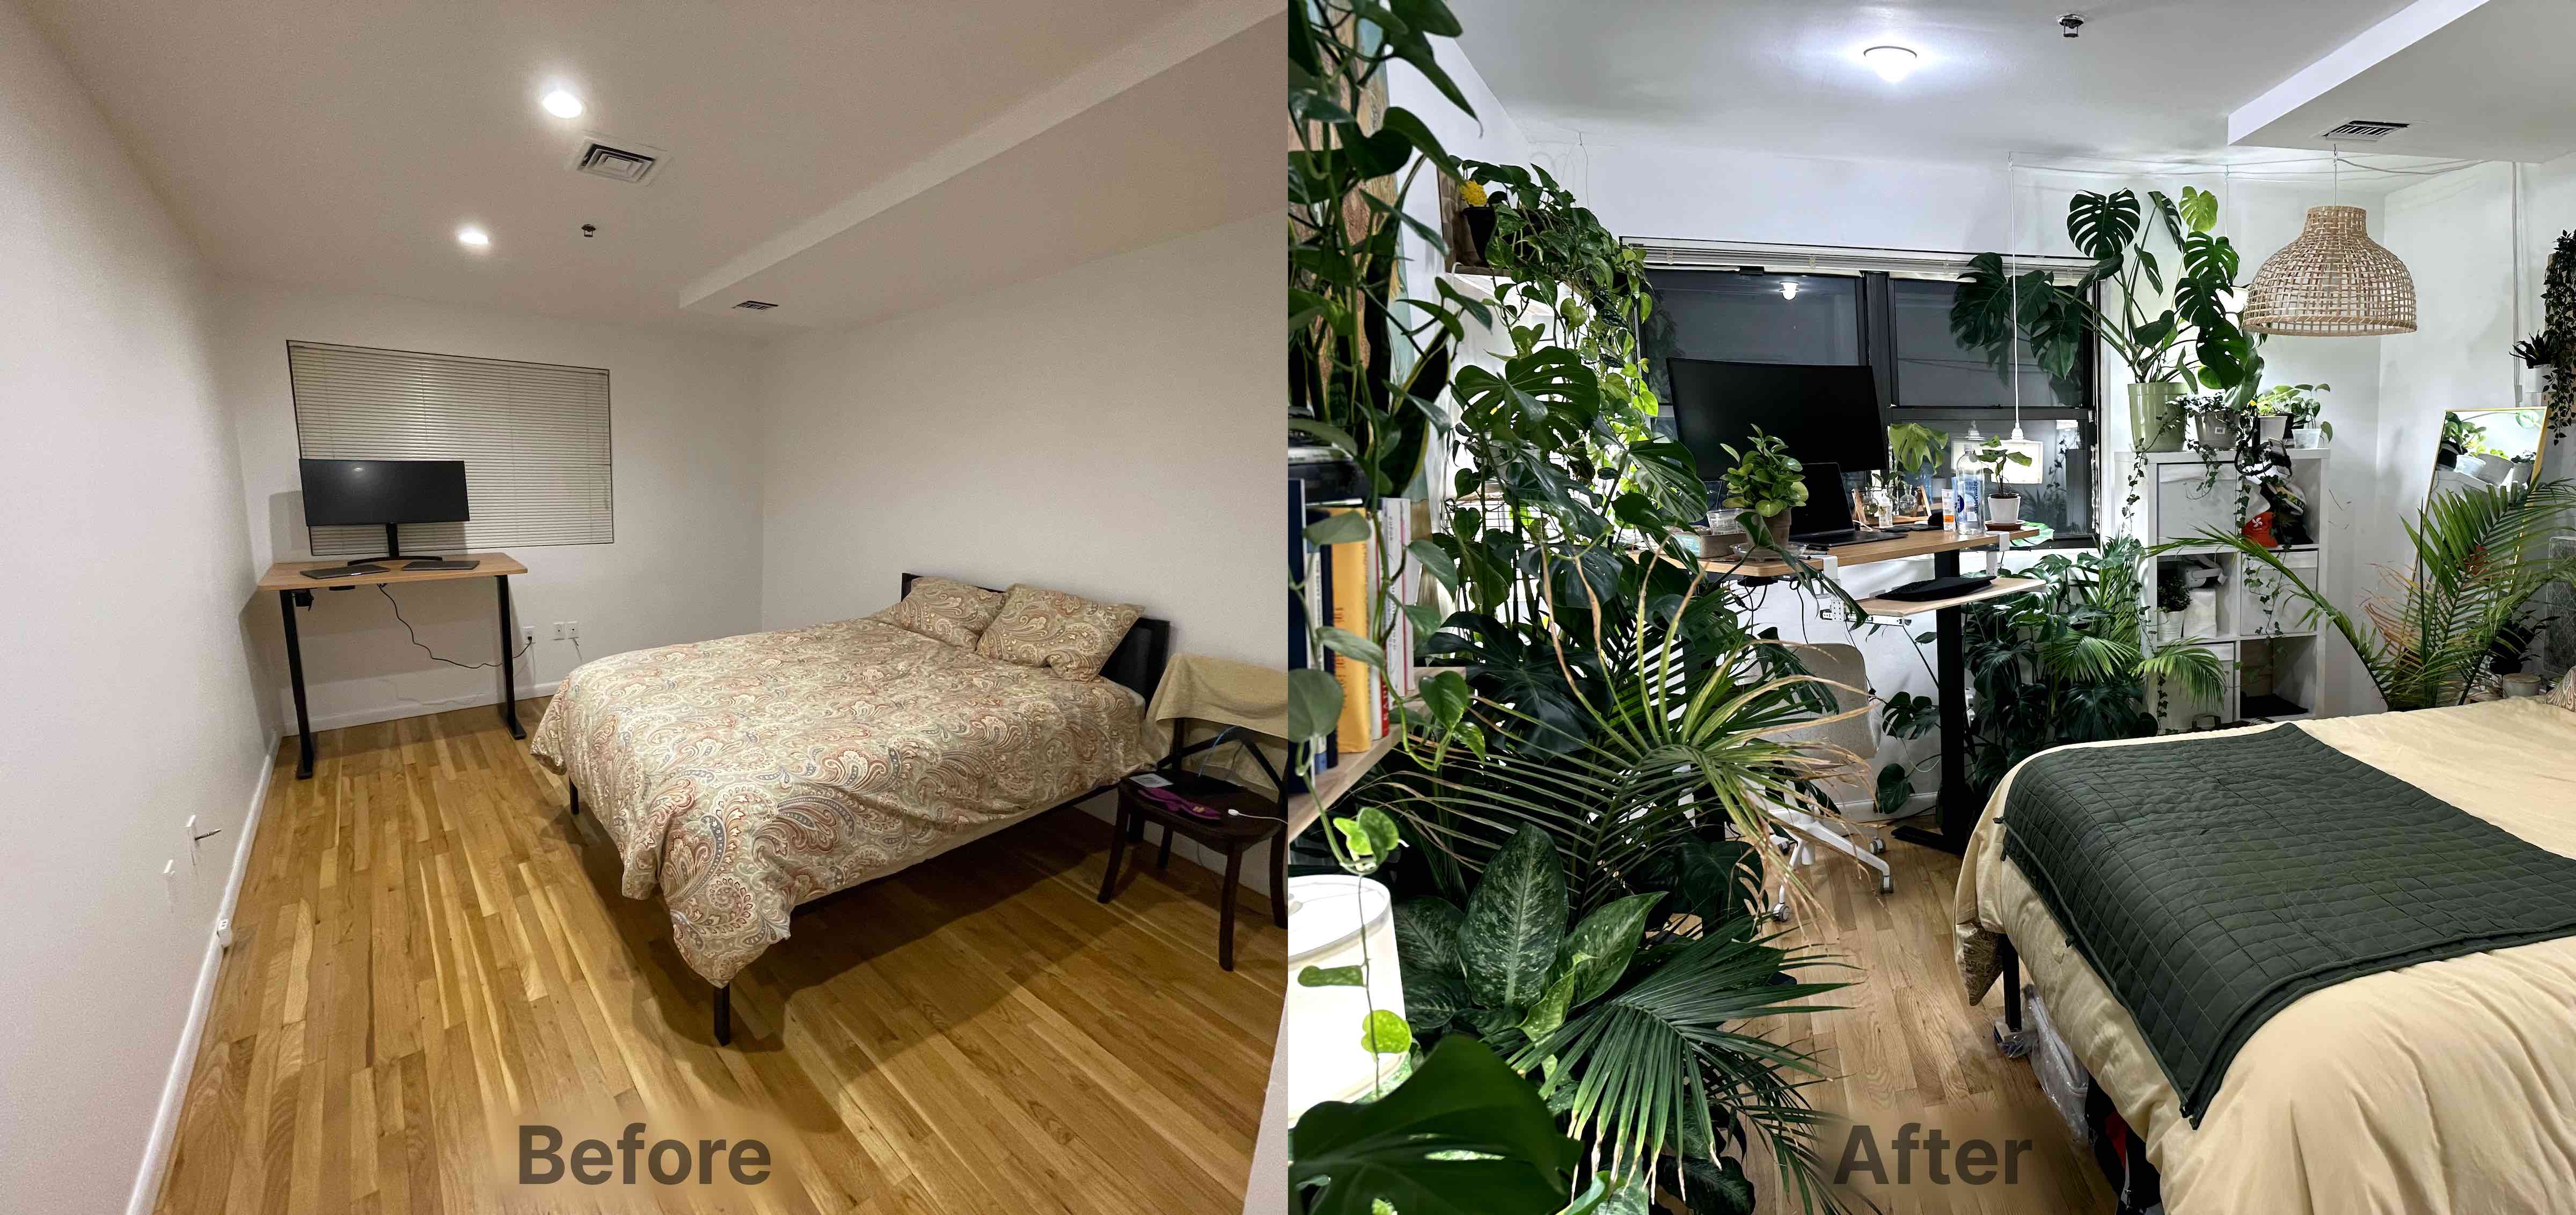 A before and after photos. The before photo shows a bare-walled bedroom with only a standing desk and a bed. The after photo still has the desk and bed, but the photo is overflowing with green plants, which cover most surfaces.